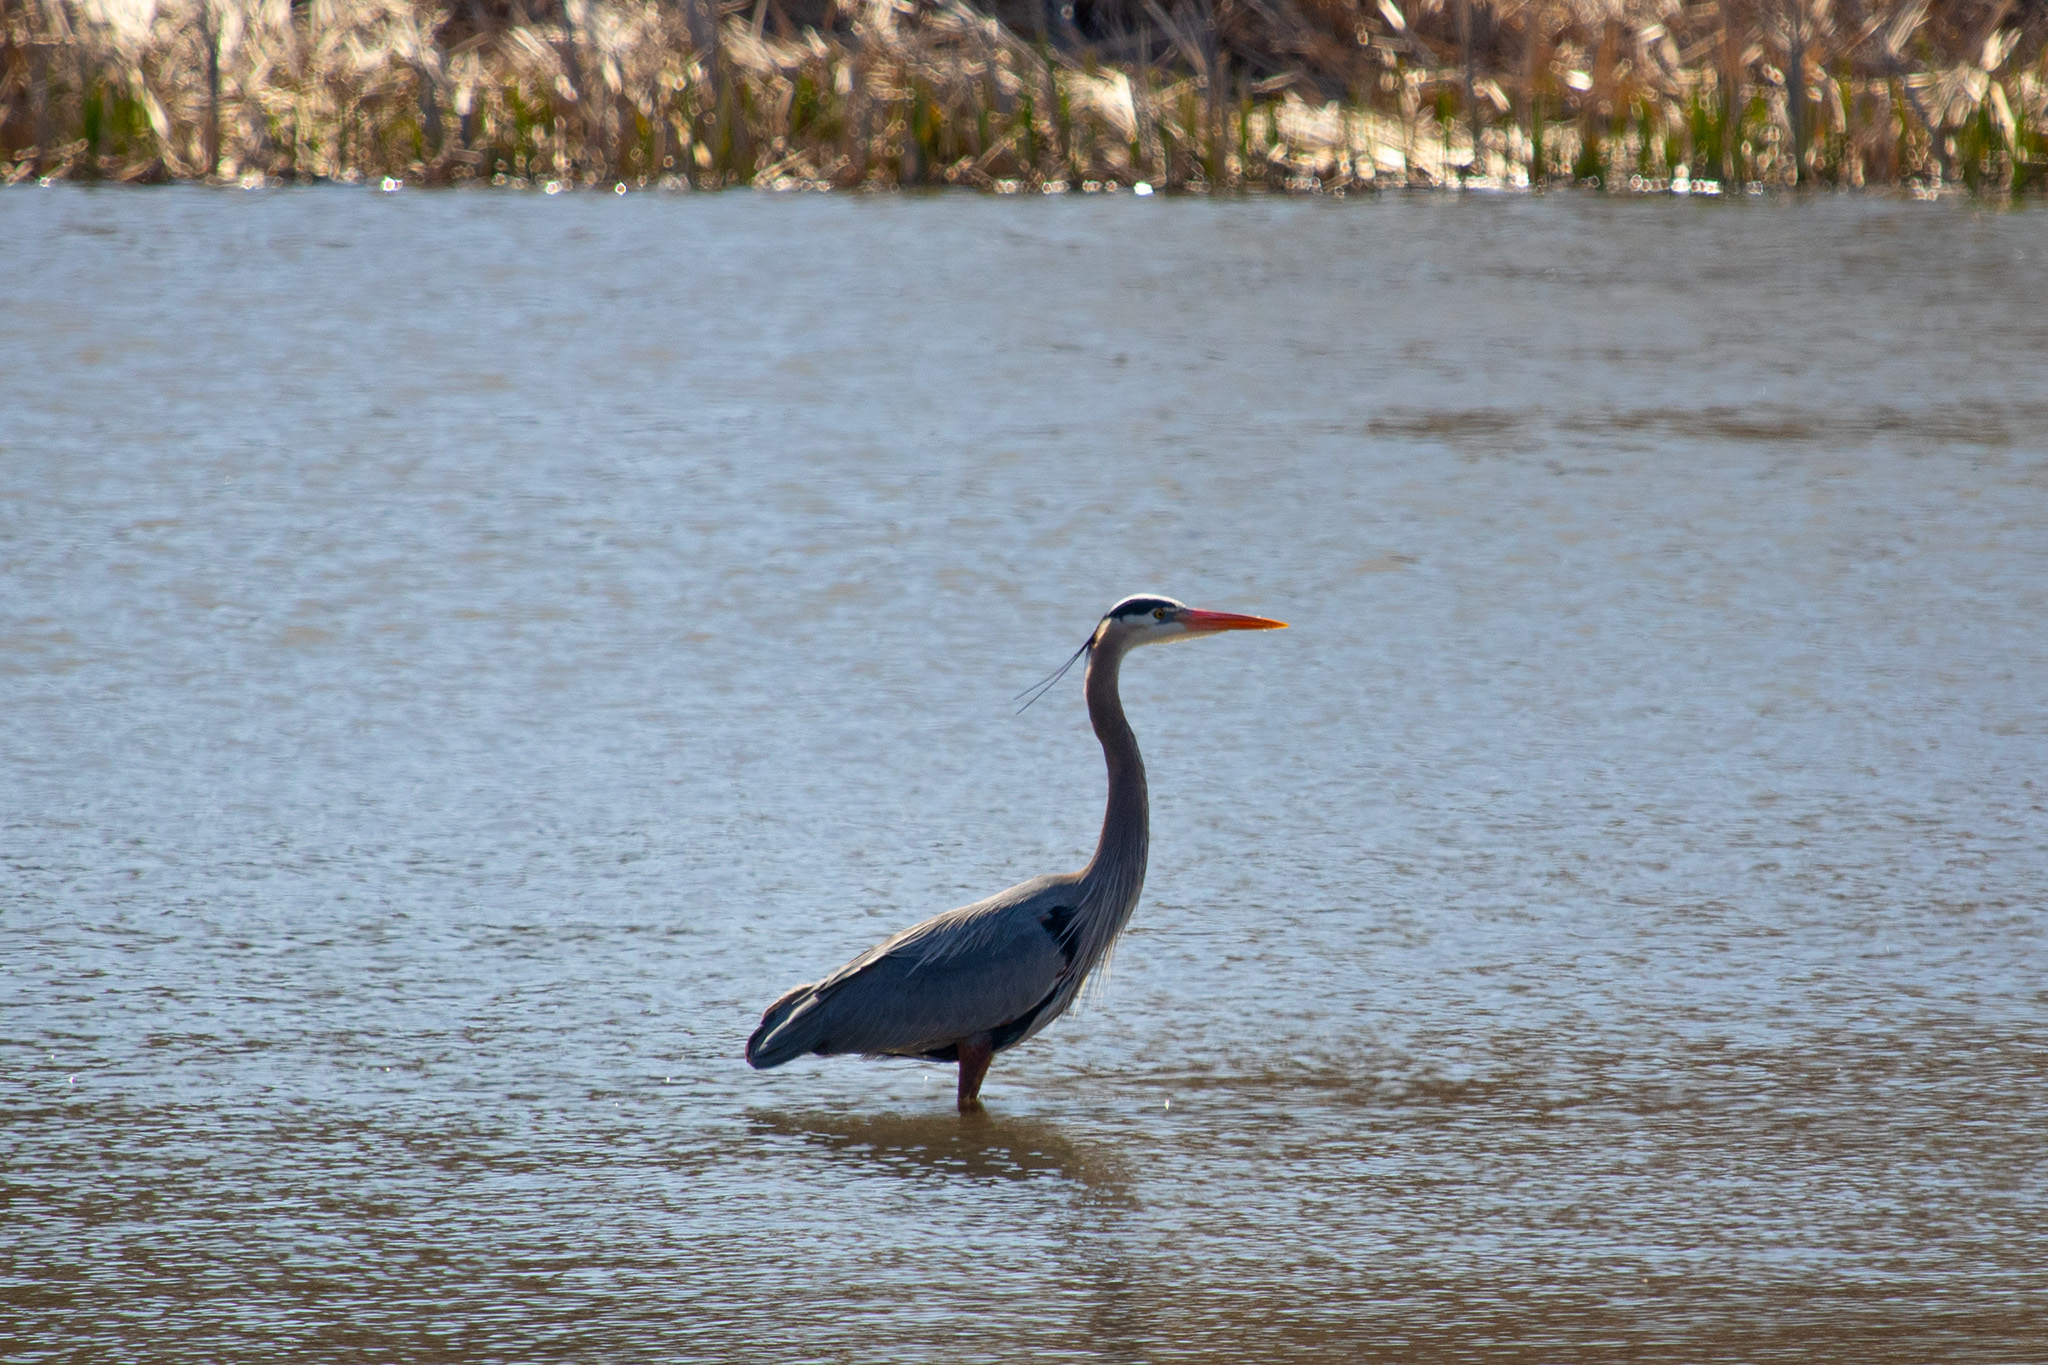 A crane standing tall in Second Marsh